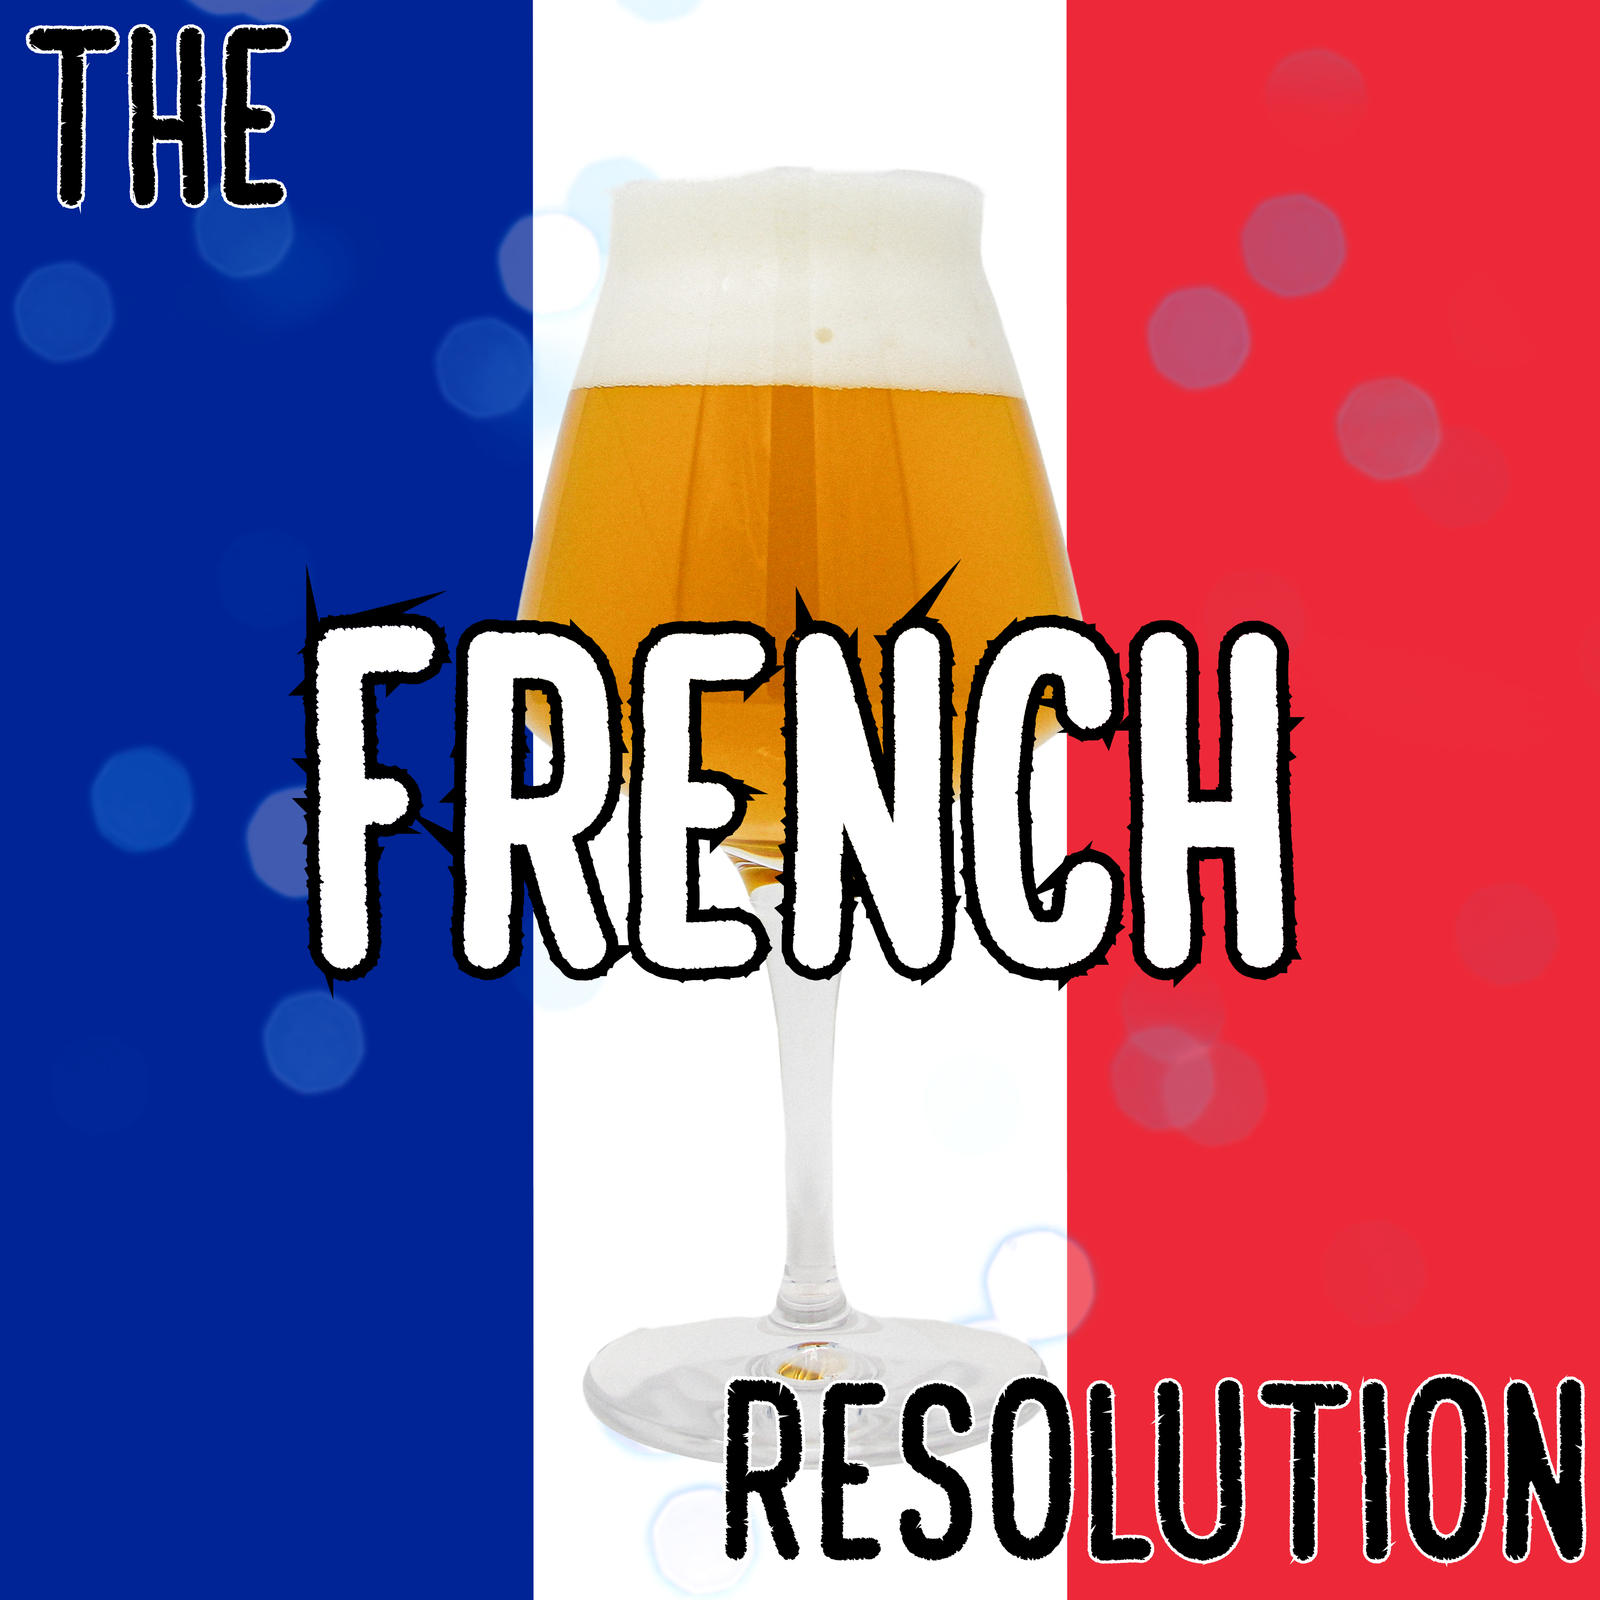 The French Resolution - Grisette Recipe